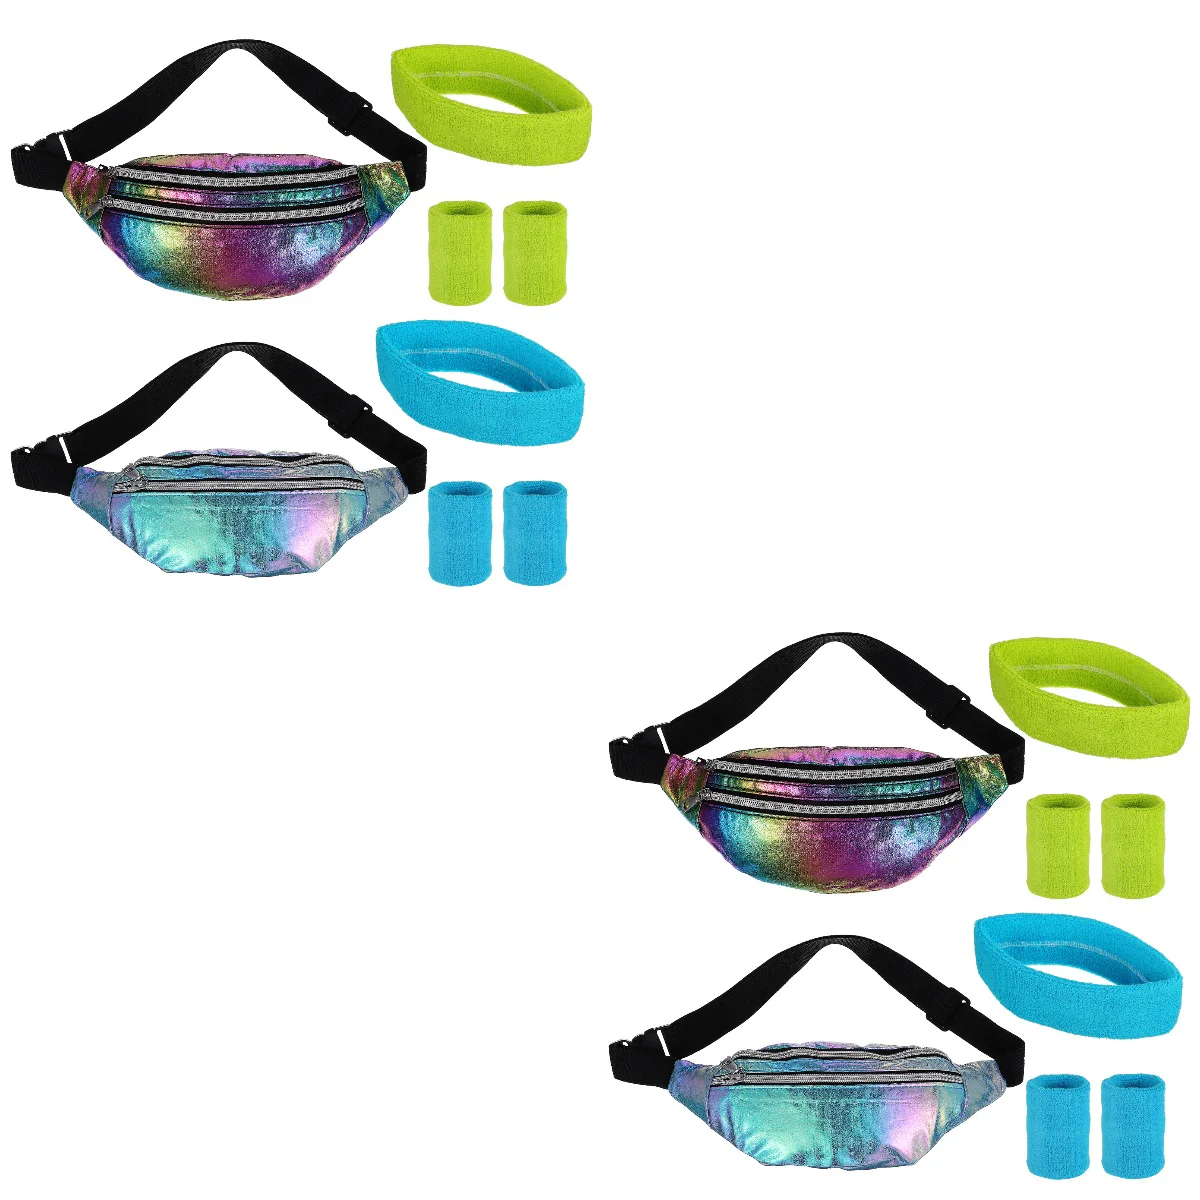 

2pcs Women's Vintage Holographic Fanny Packs Belt Bags with Headbands and Wristbands